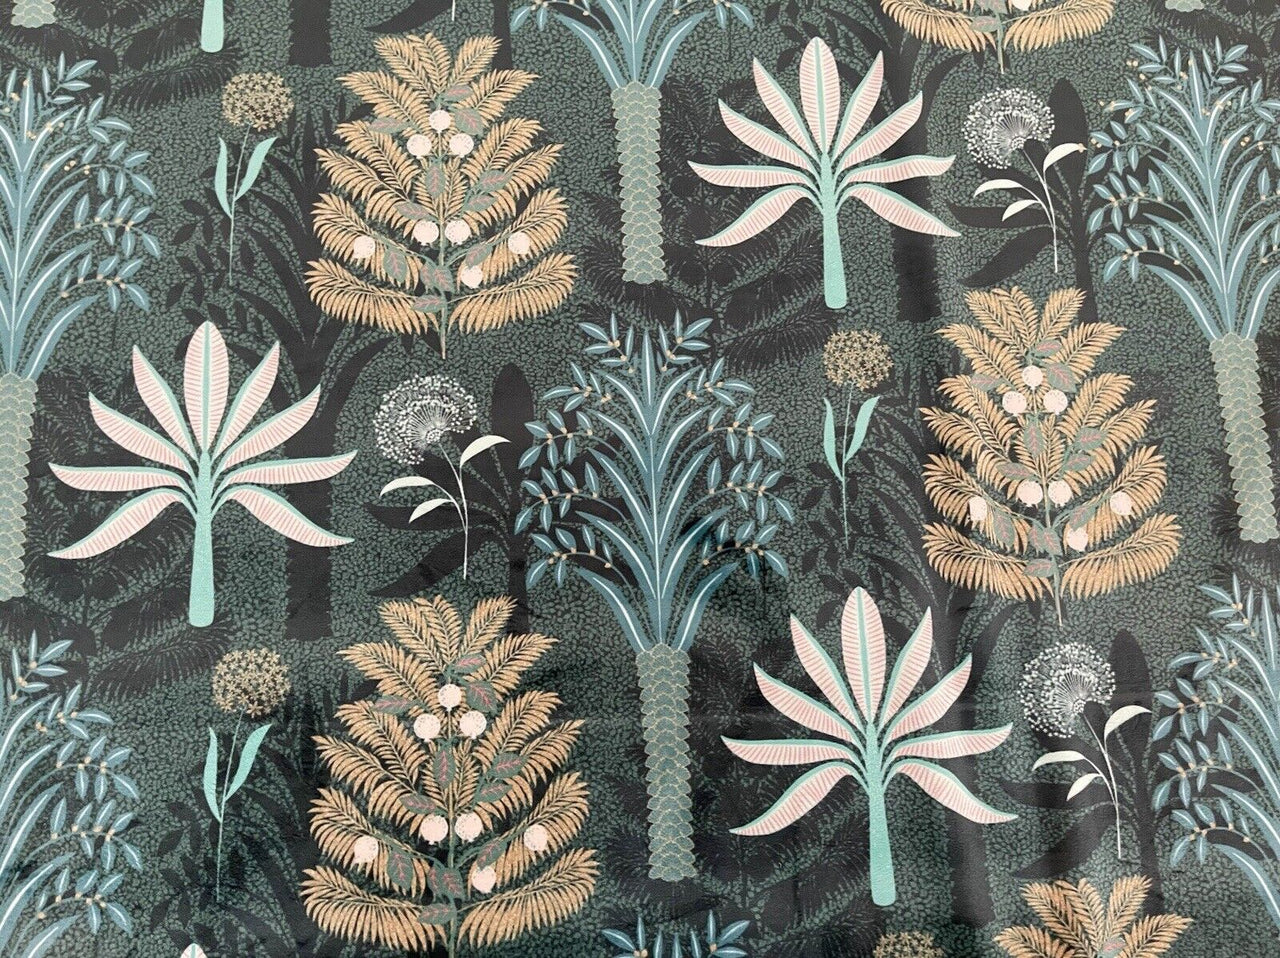 Banana Tree Velvet Fabric Sold by Meter Green Botanical Sewing Material Floral Textile For Sewing Upholstery